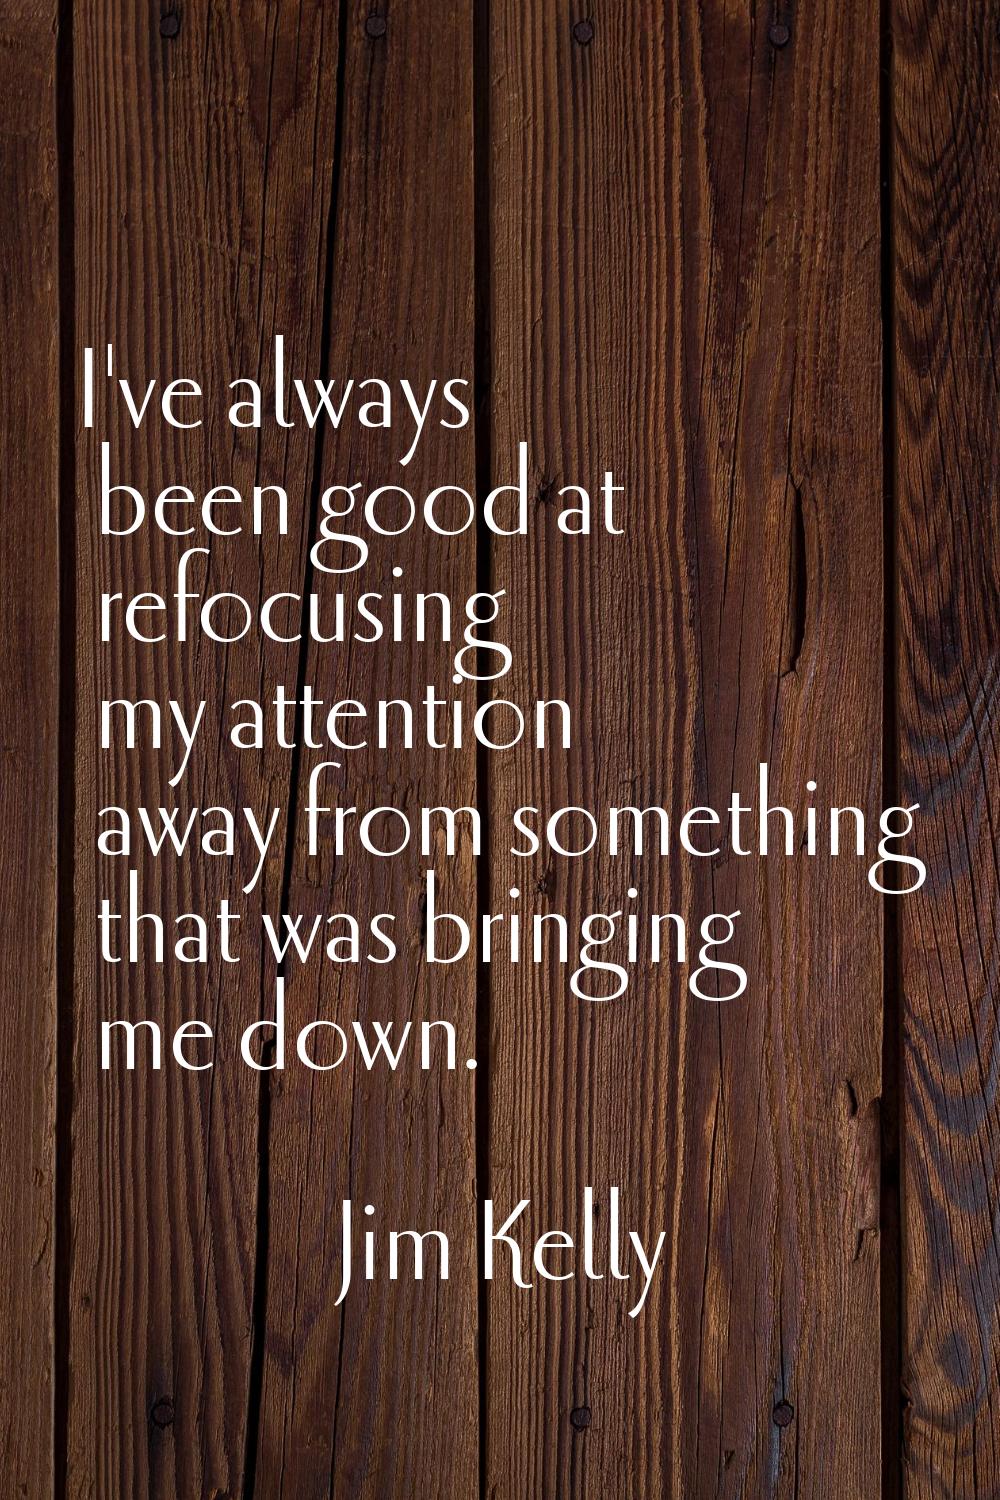 I've always been good at refocusing my attention away from something that was bringing me down.